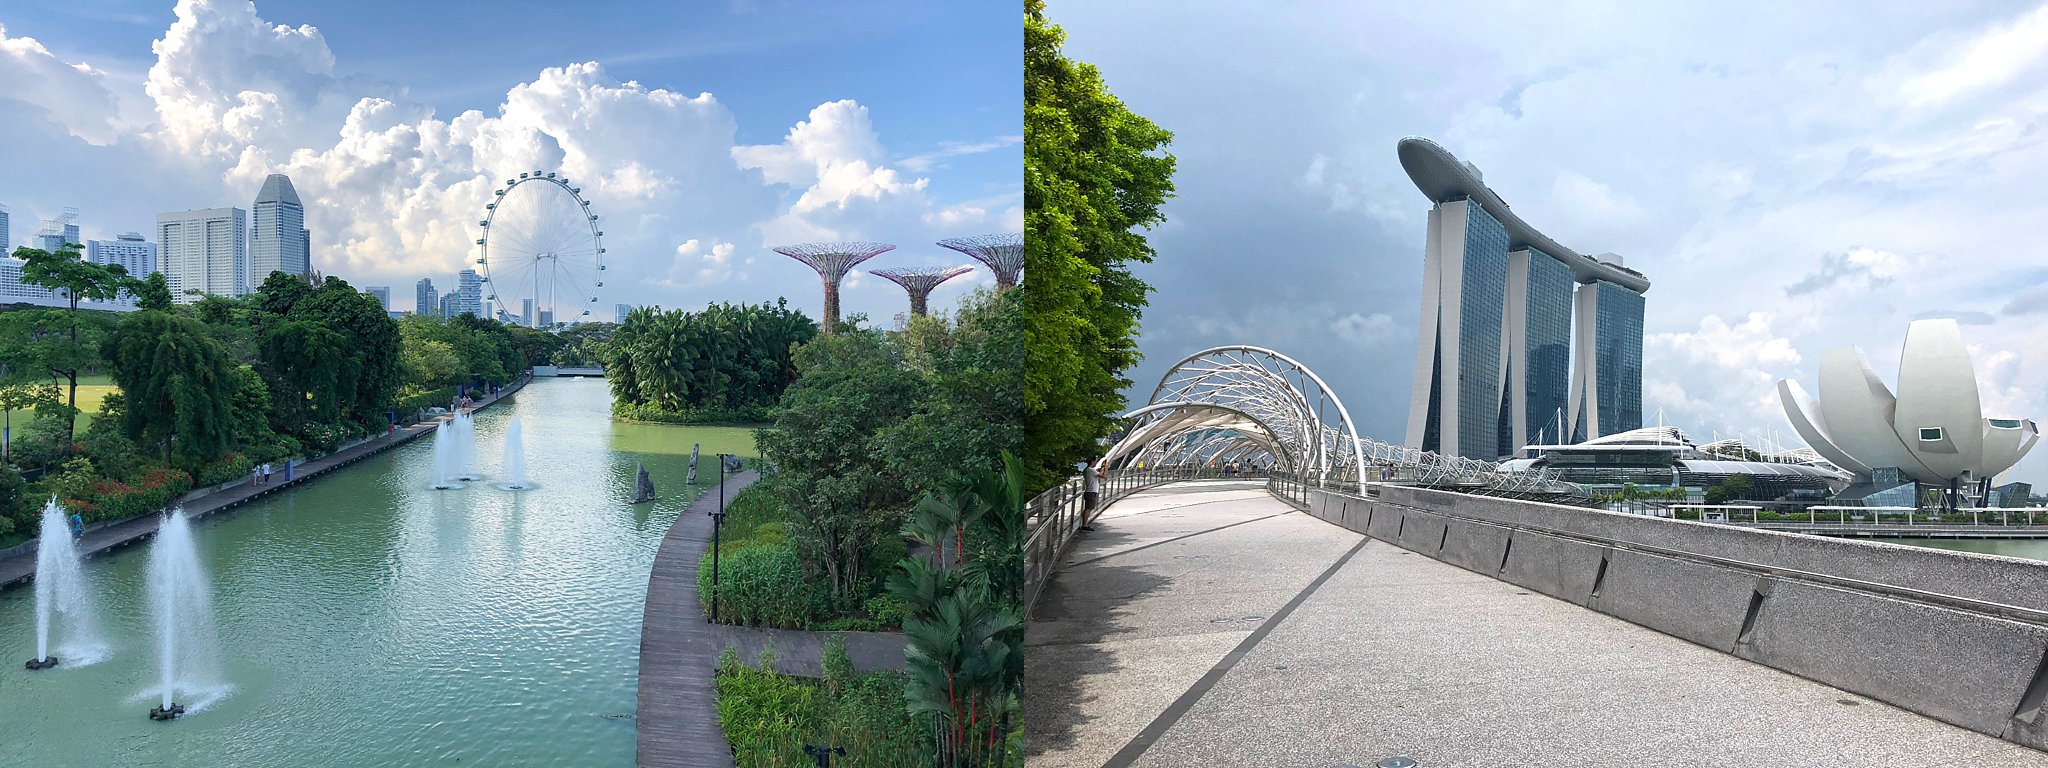 Gardens by the Bay, Singapore (taken with iPhone 8)